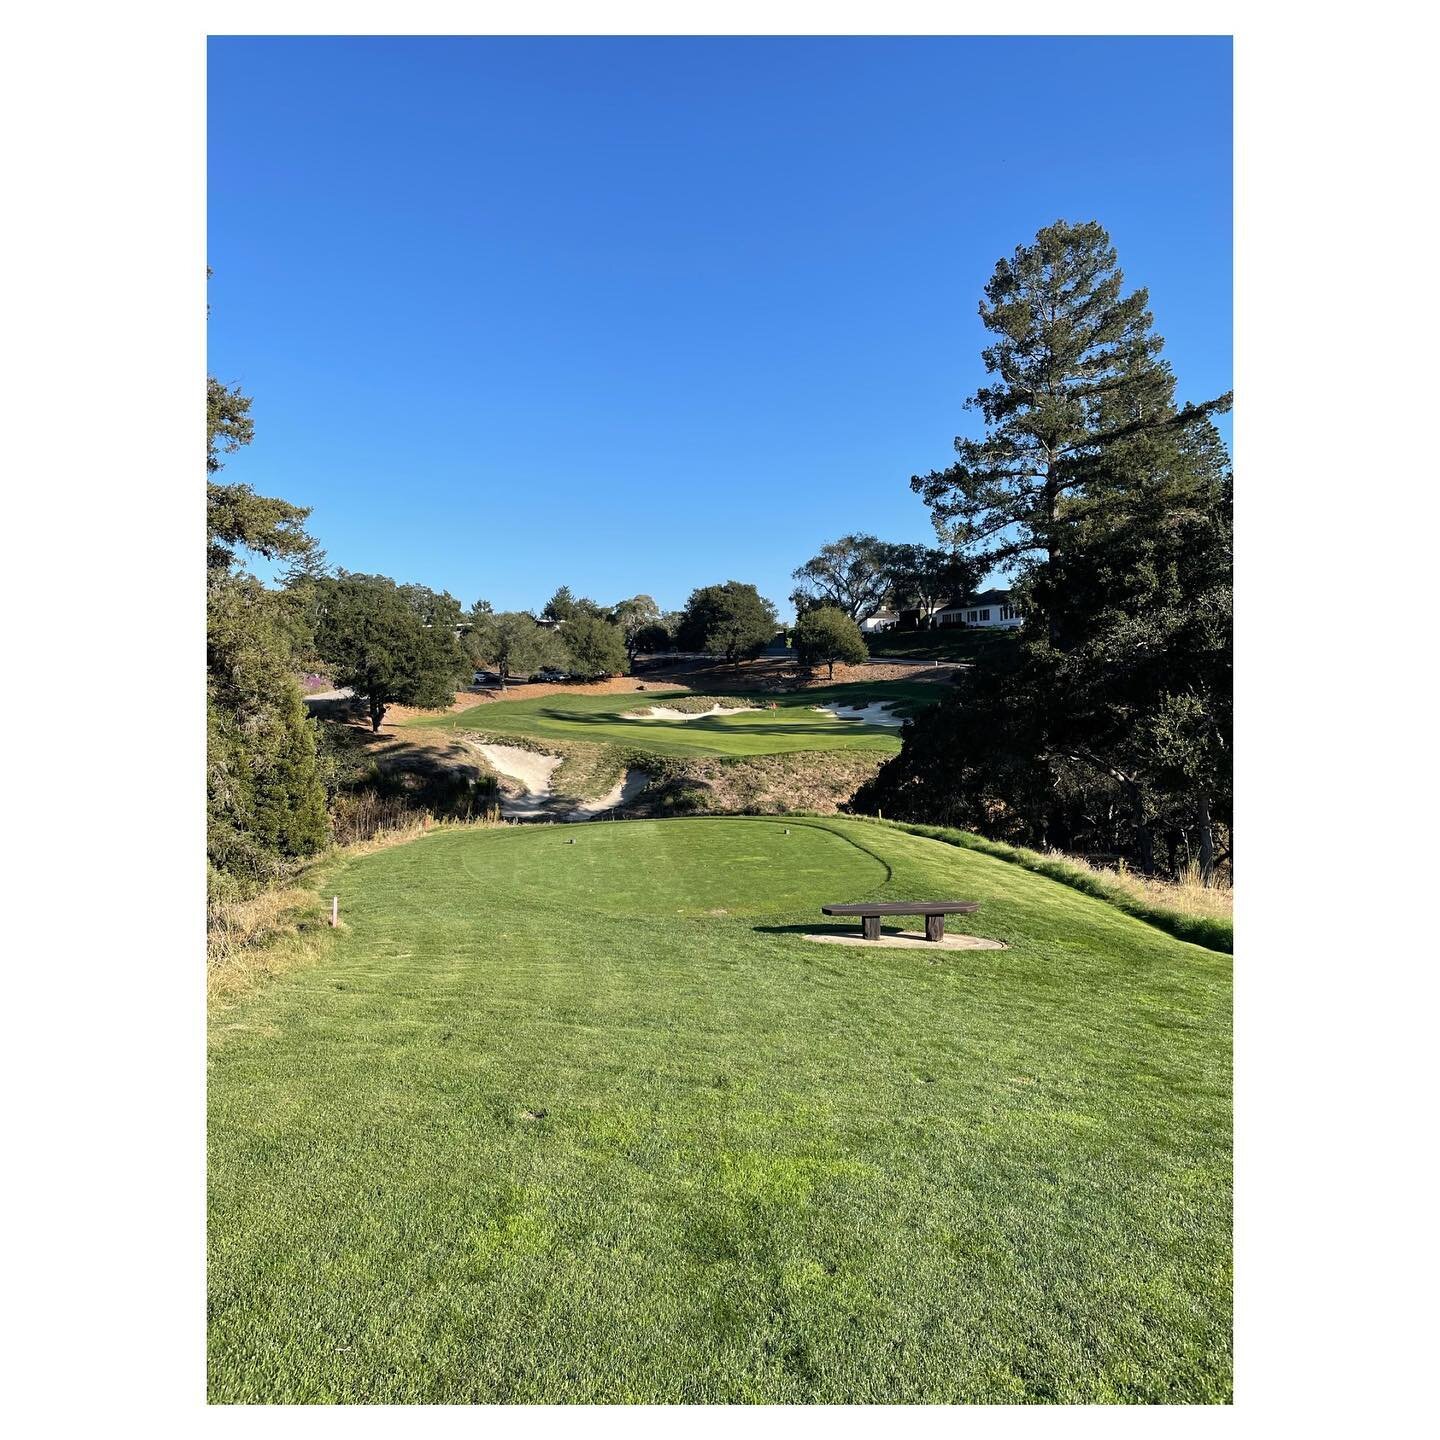 10.28.23 // the 18th at Pasatiempo. The back 9 starts with a tee shot up the hill over the barranca on 10, and ends here with a short iron/wedge down the hill over the same hazard. A poetic conclusion to one of the best walks in golf.